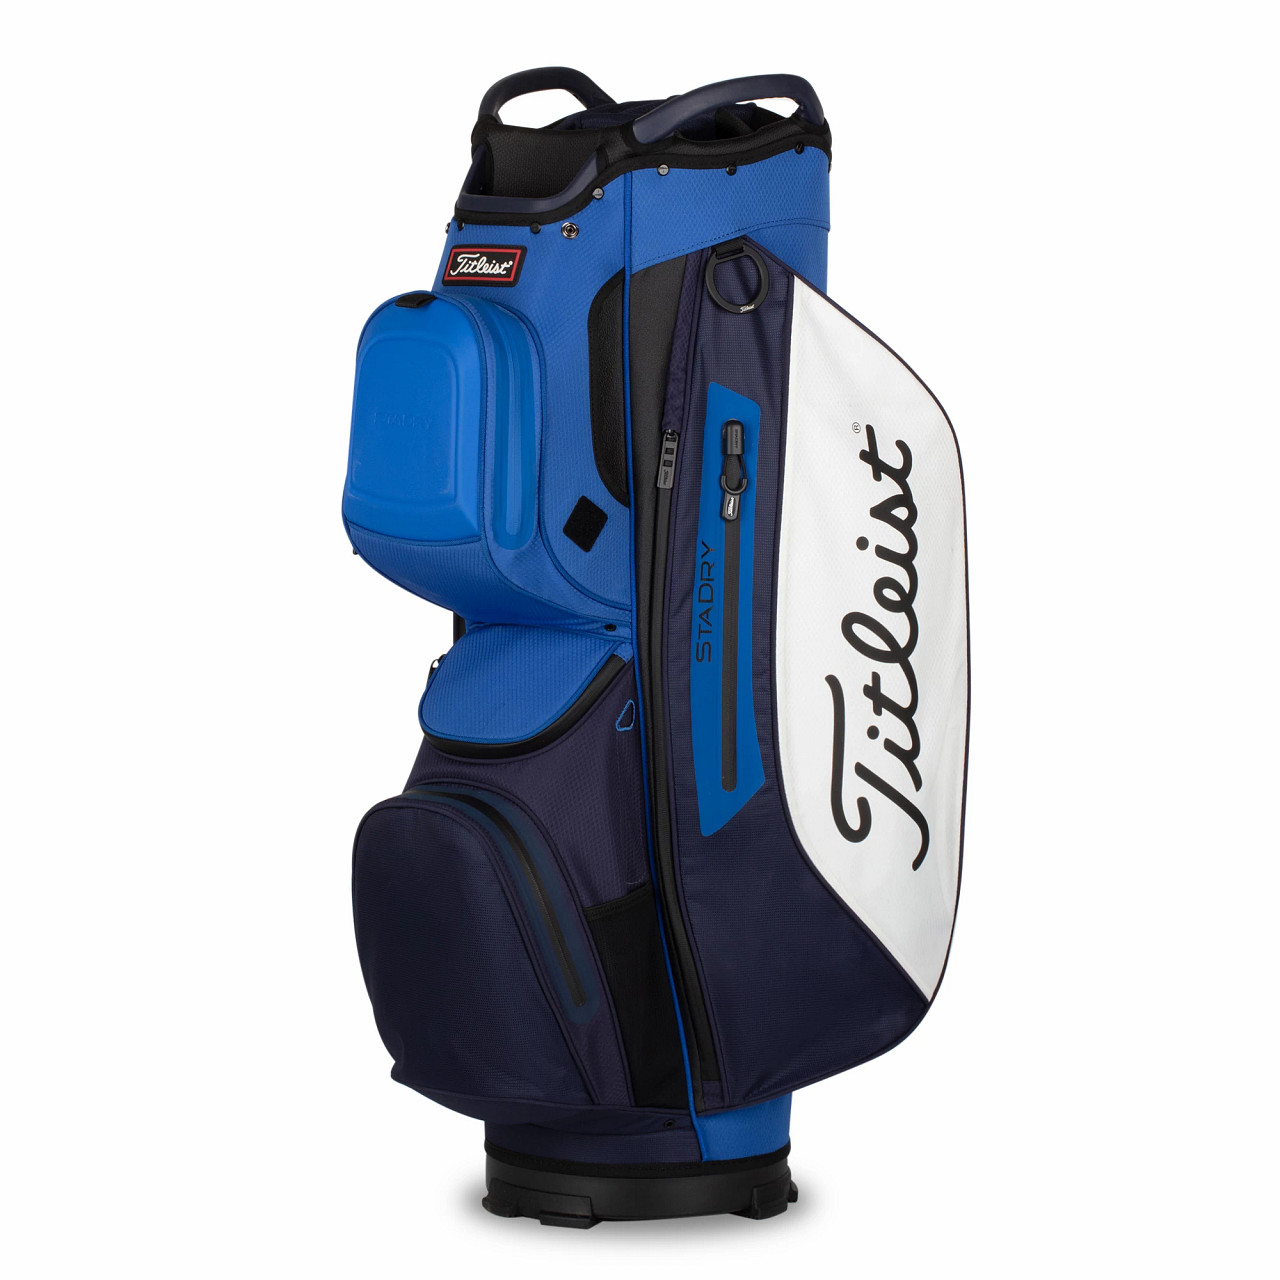 Top more than 73 titlest golf bags super hot - in.cdgdbentre